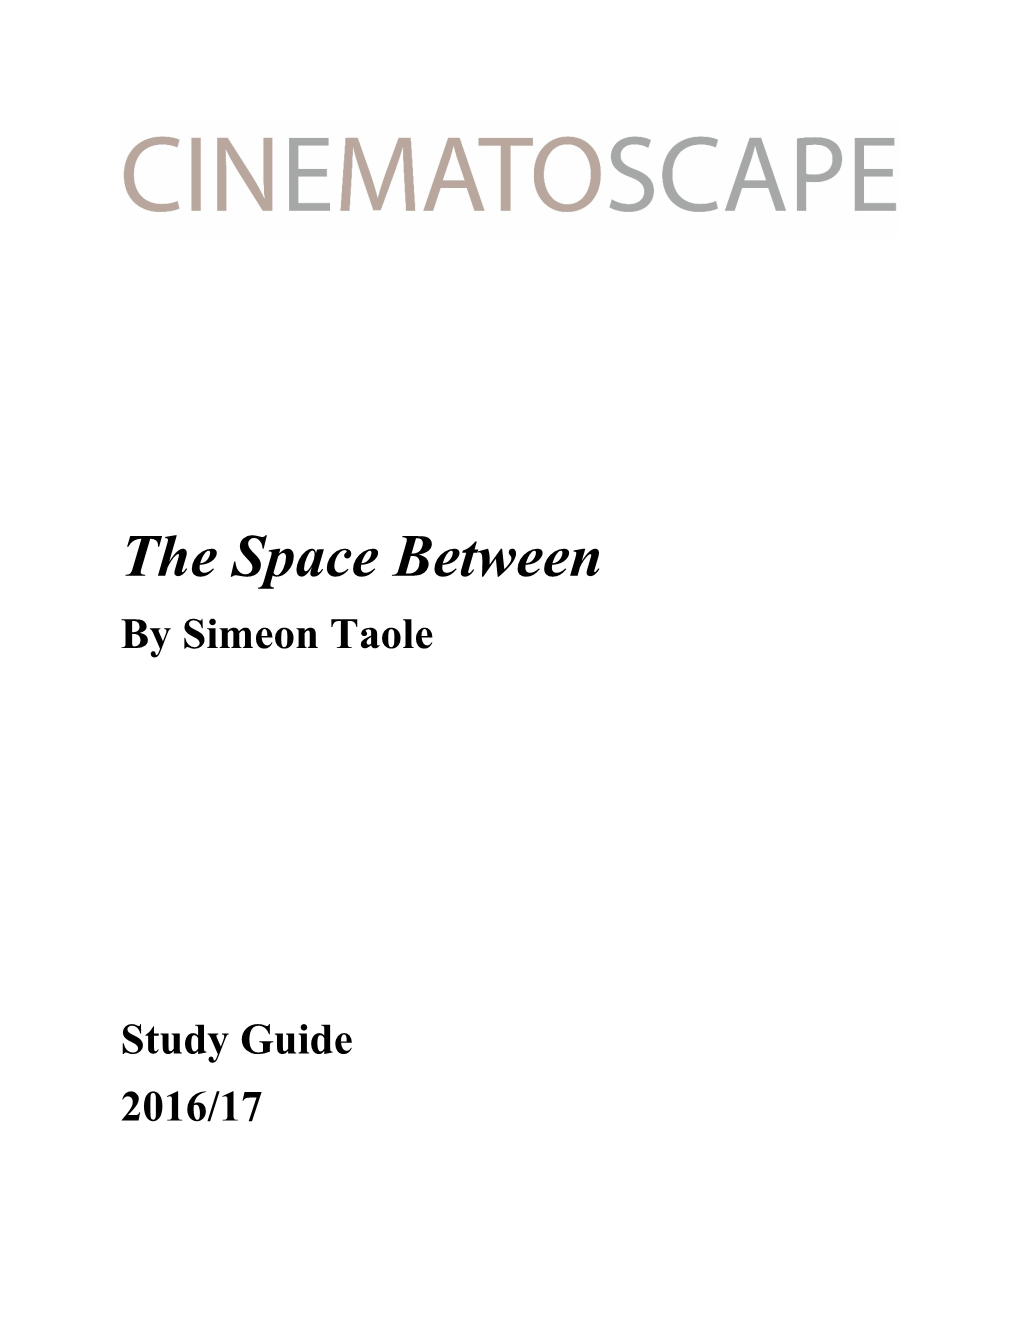 The Space Between by Simeon Taole